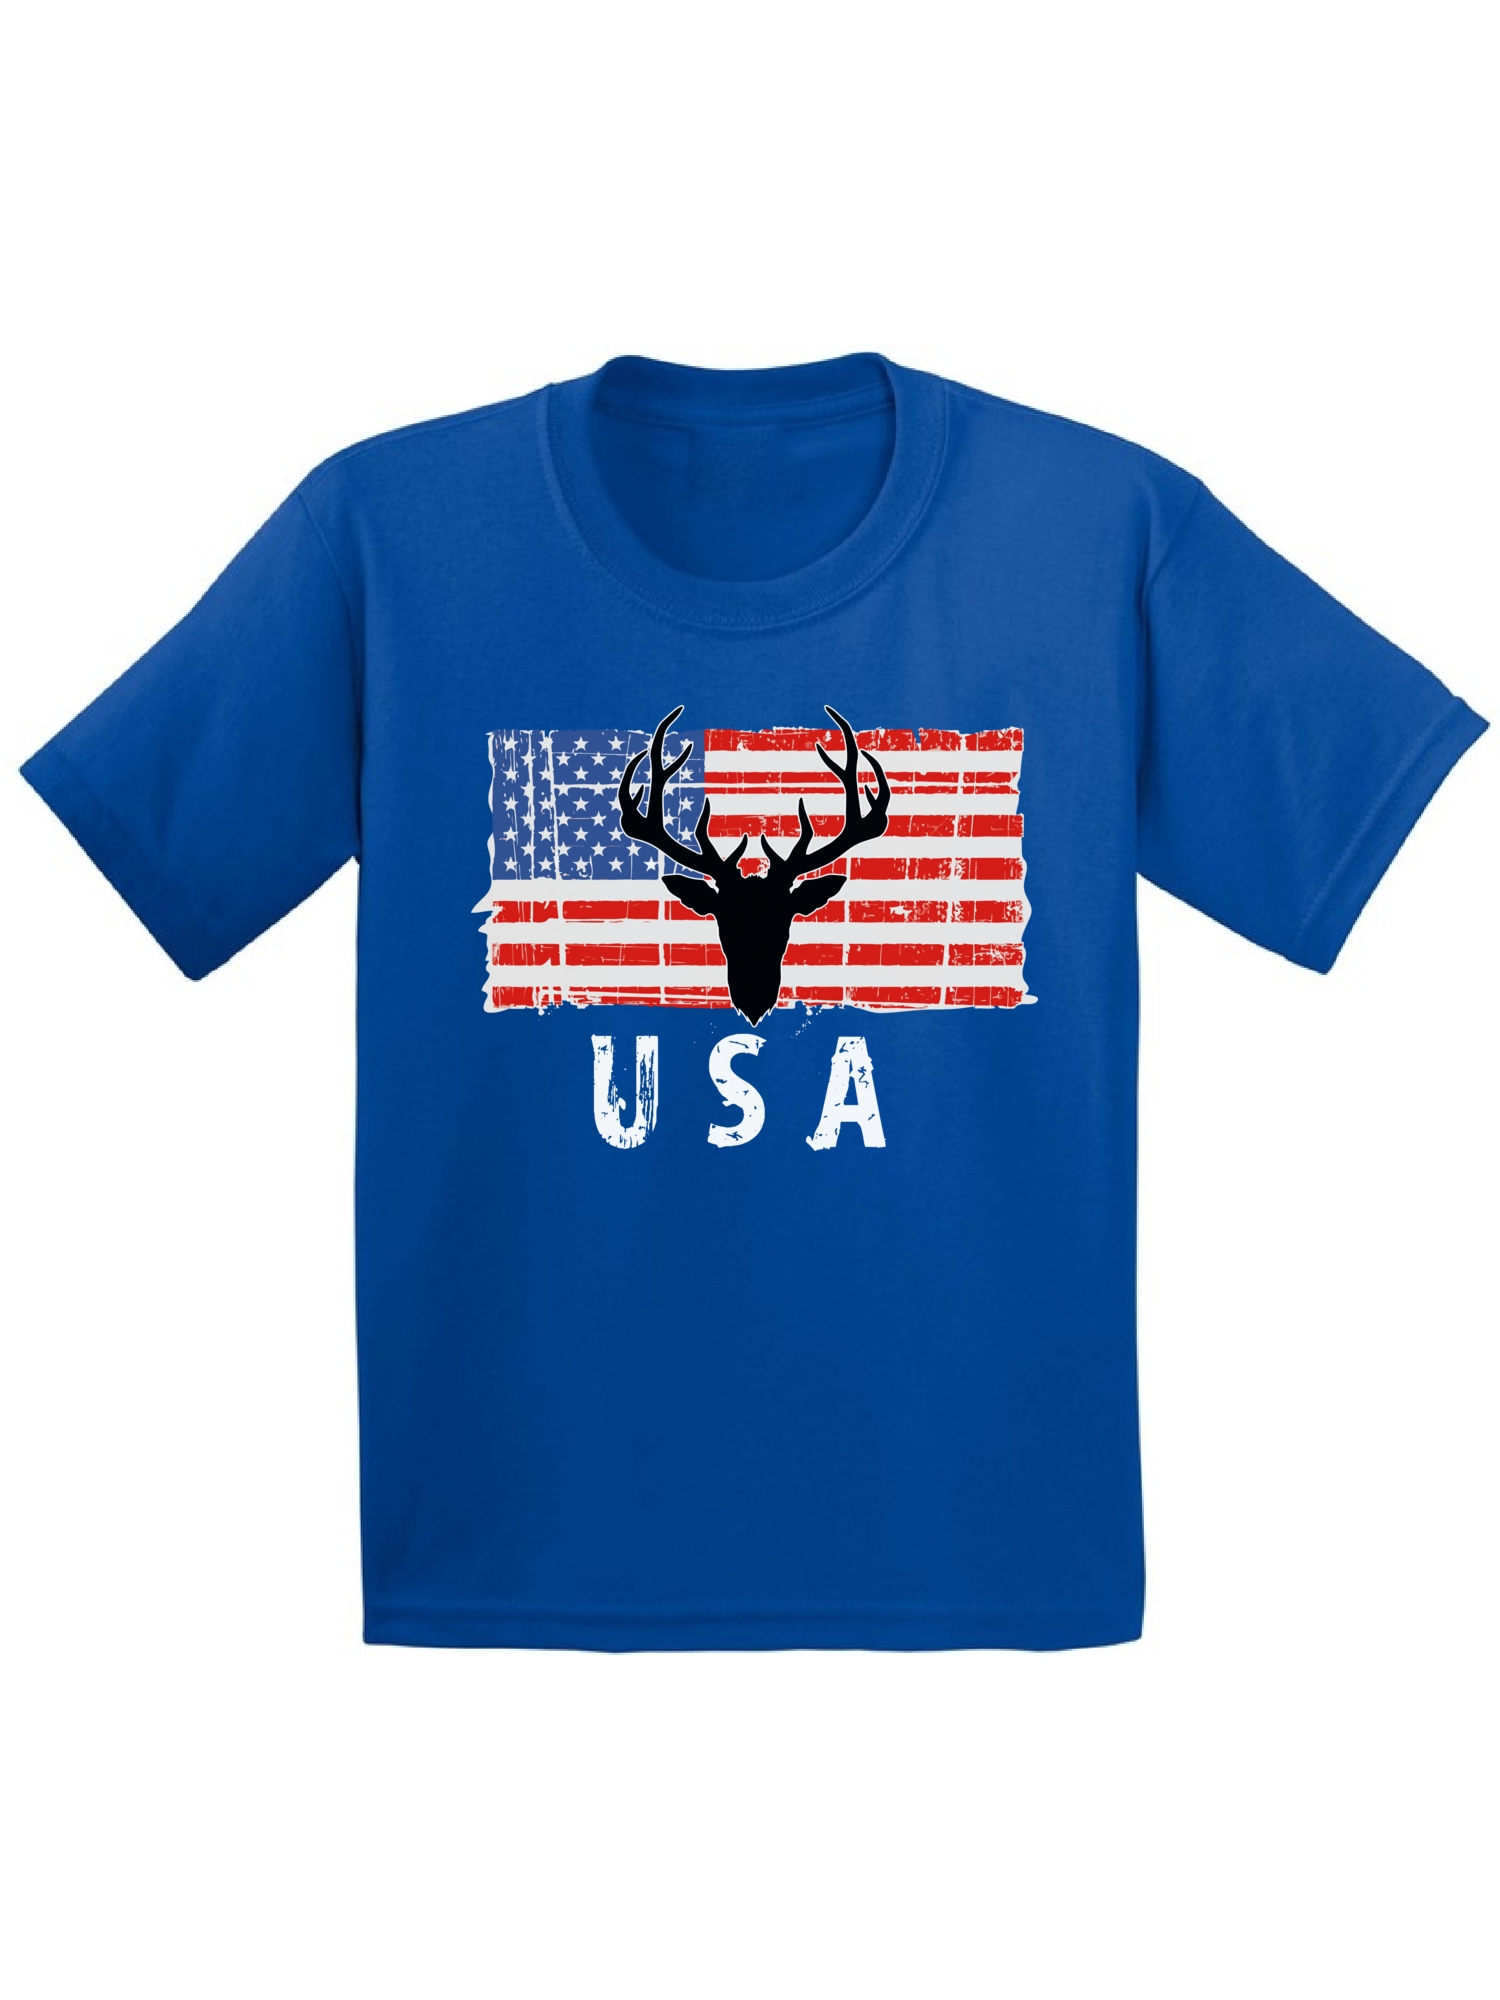 Awkward Styles Hunting Deer USA Youth Shirt Proud American Pro America Kids T shirt Made in the USA Retro USA Tshirt for Boys USA Pride Retro USA Tshirt for Girls Stripes and Stars Kids Gifts - image 1 of 4